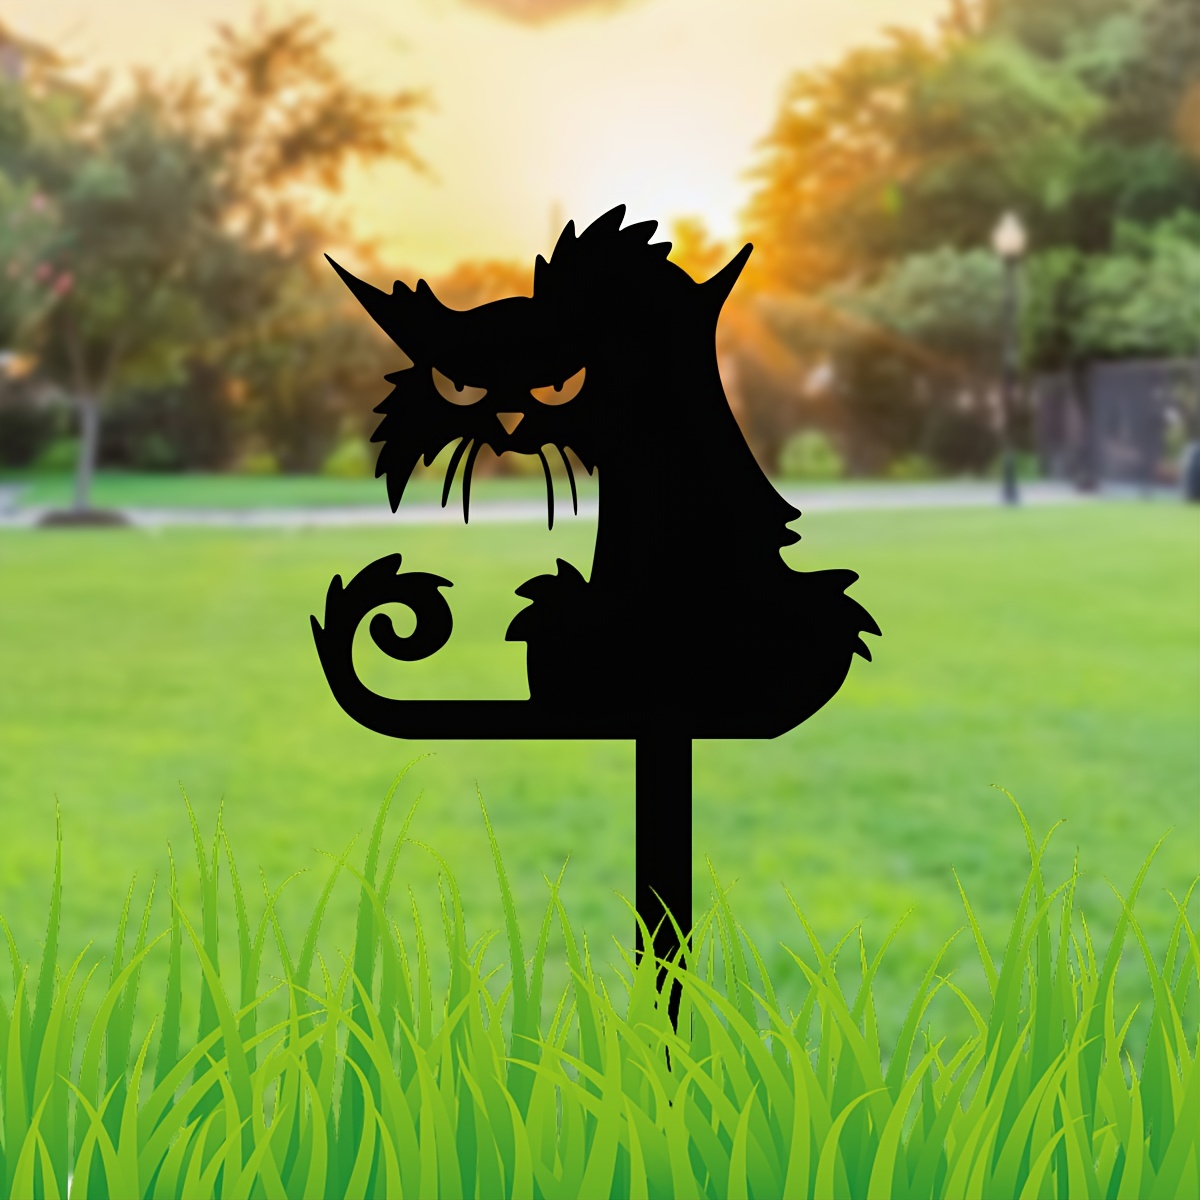 

1pc Evil Cat Garden Stake, Insert Silhouette Plaque Statue For Yard, Lawn, Patio, Halloween, Hauntedhouse, Fall Decor, Gift For Gardener